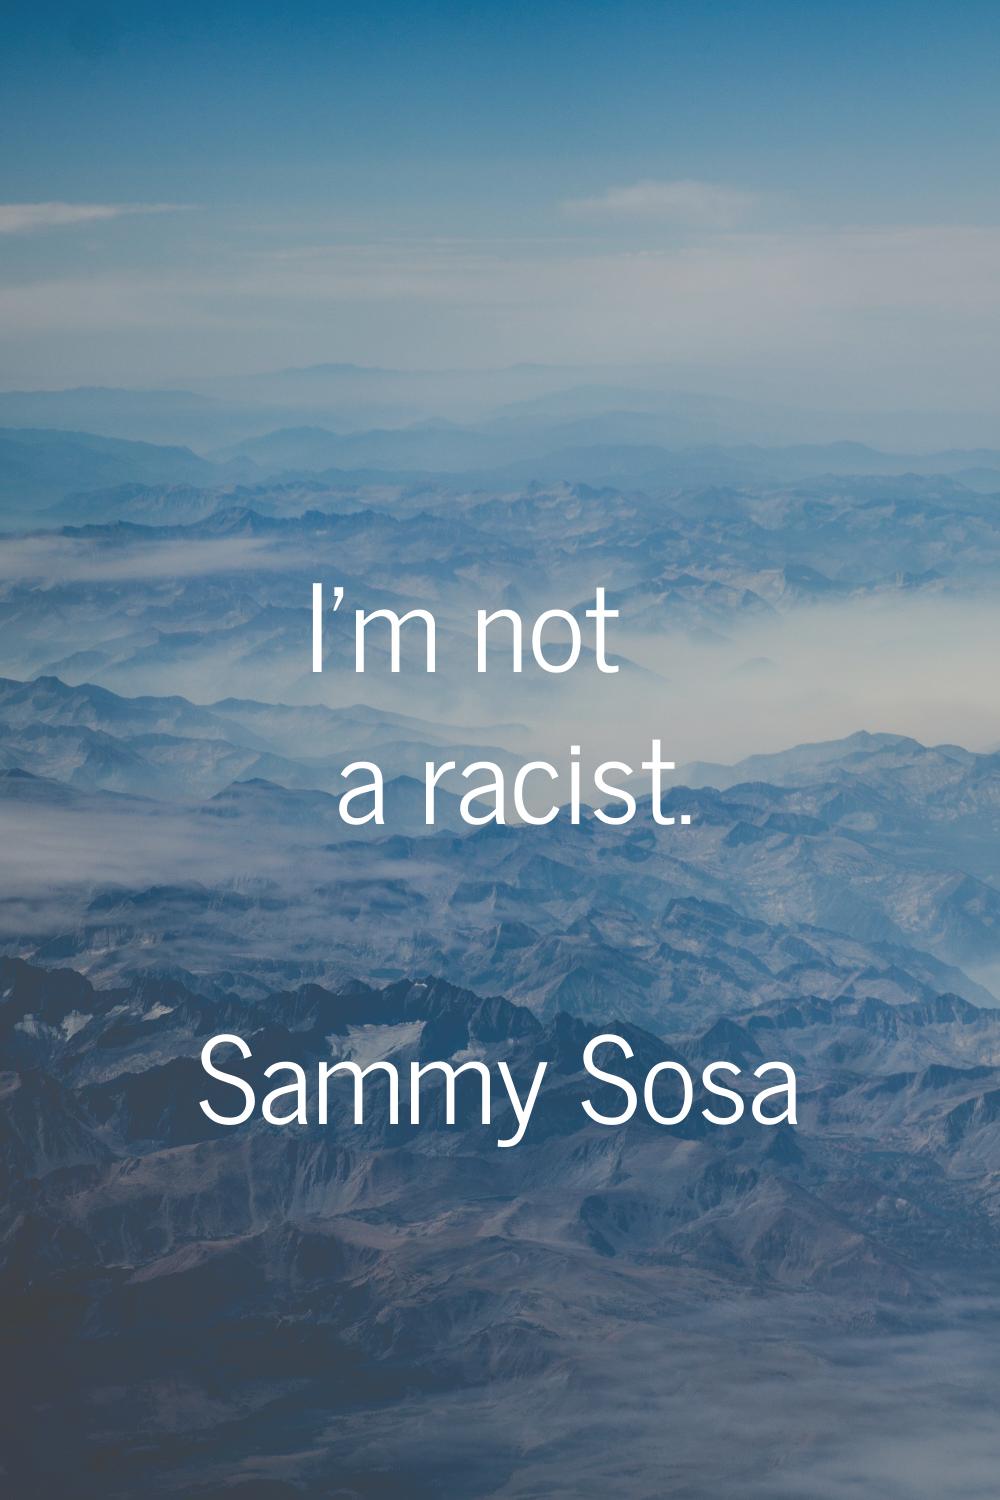 I'm not a racist.